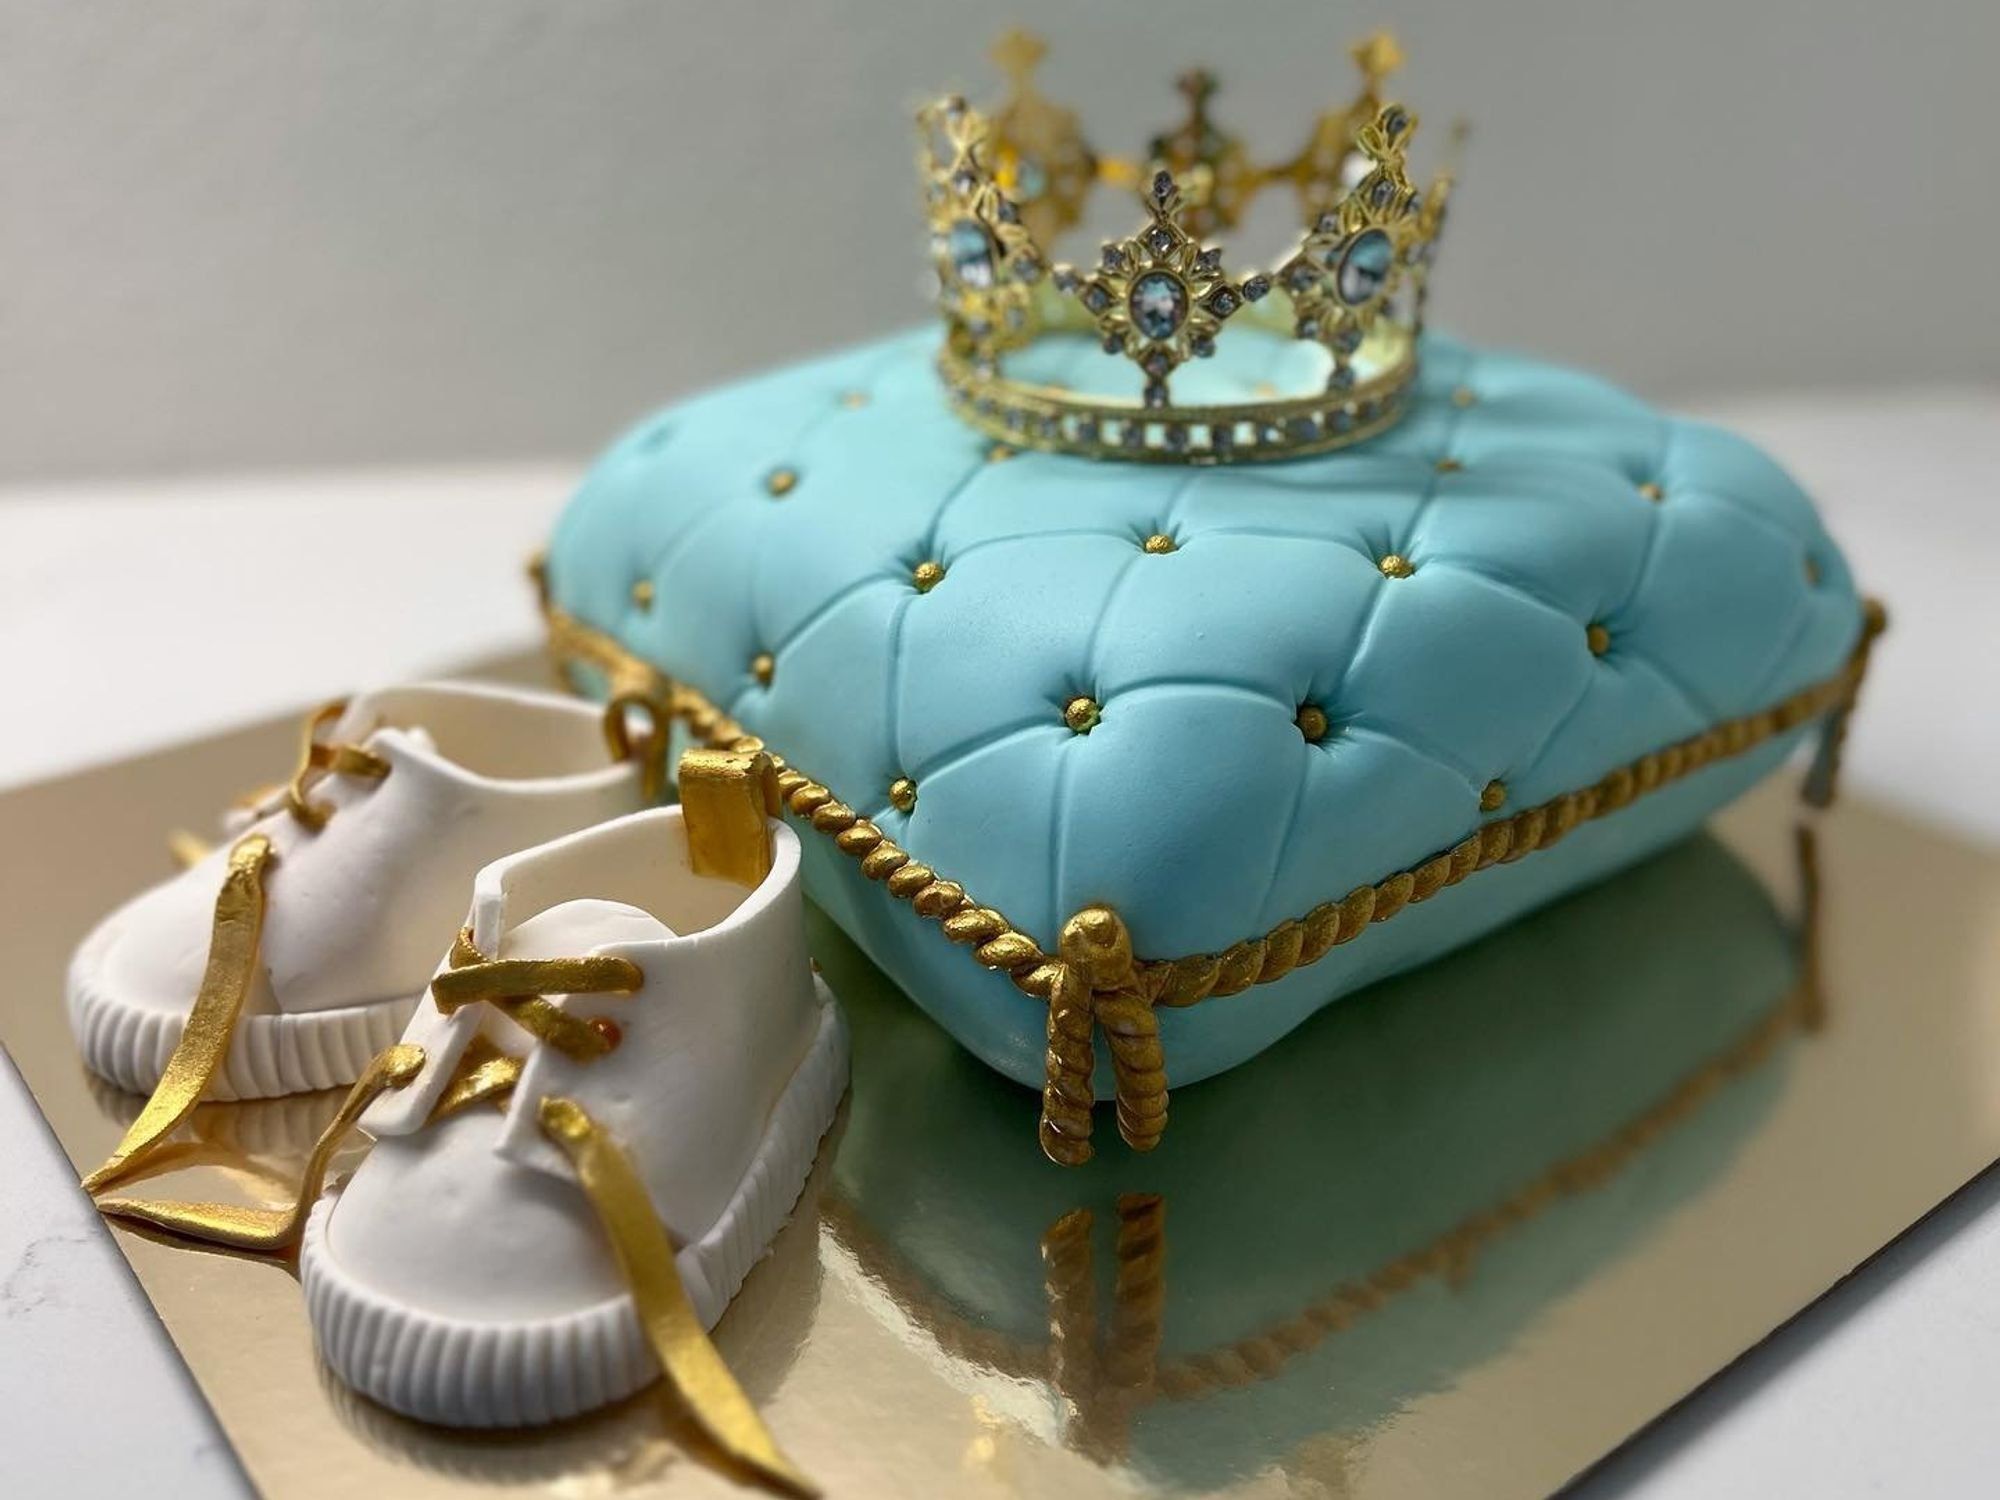 Stunning Dallas cake queen Sweet Gilly's Vegan to open bakery-cafe in  Frisco - CultureMap Dallas